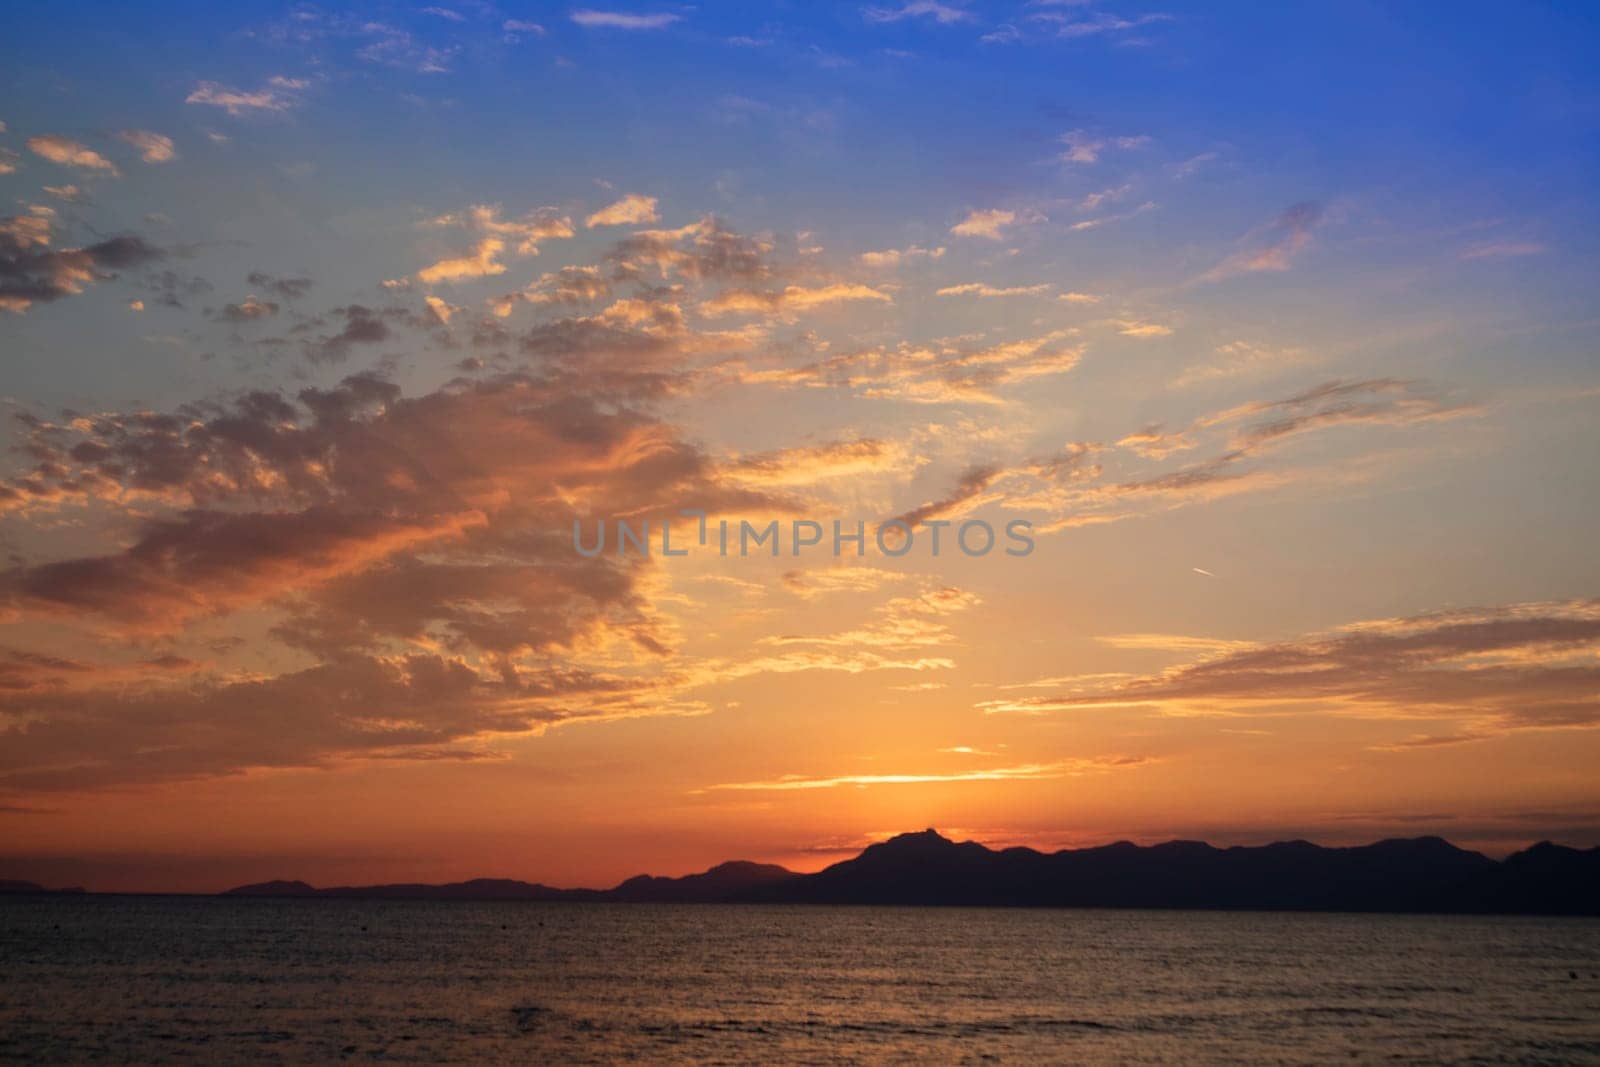 Photographic documentation of a sunset over the sea  by fotografiche.eu